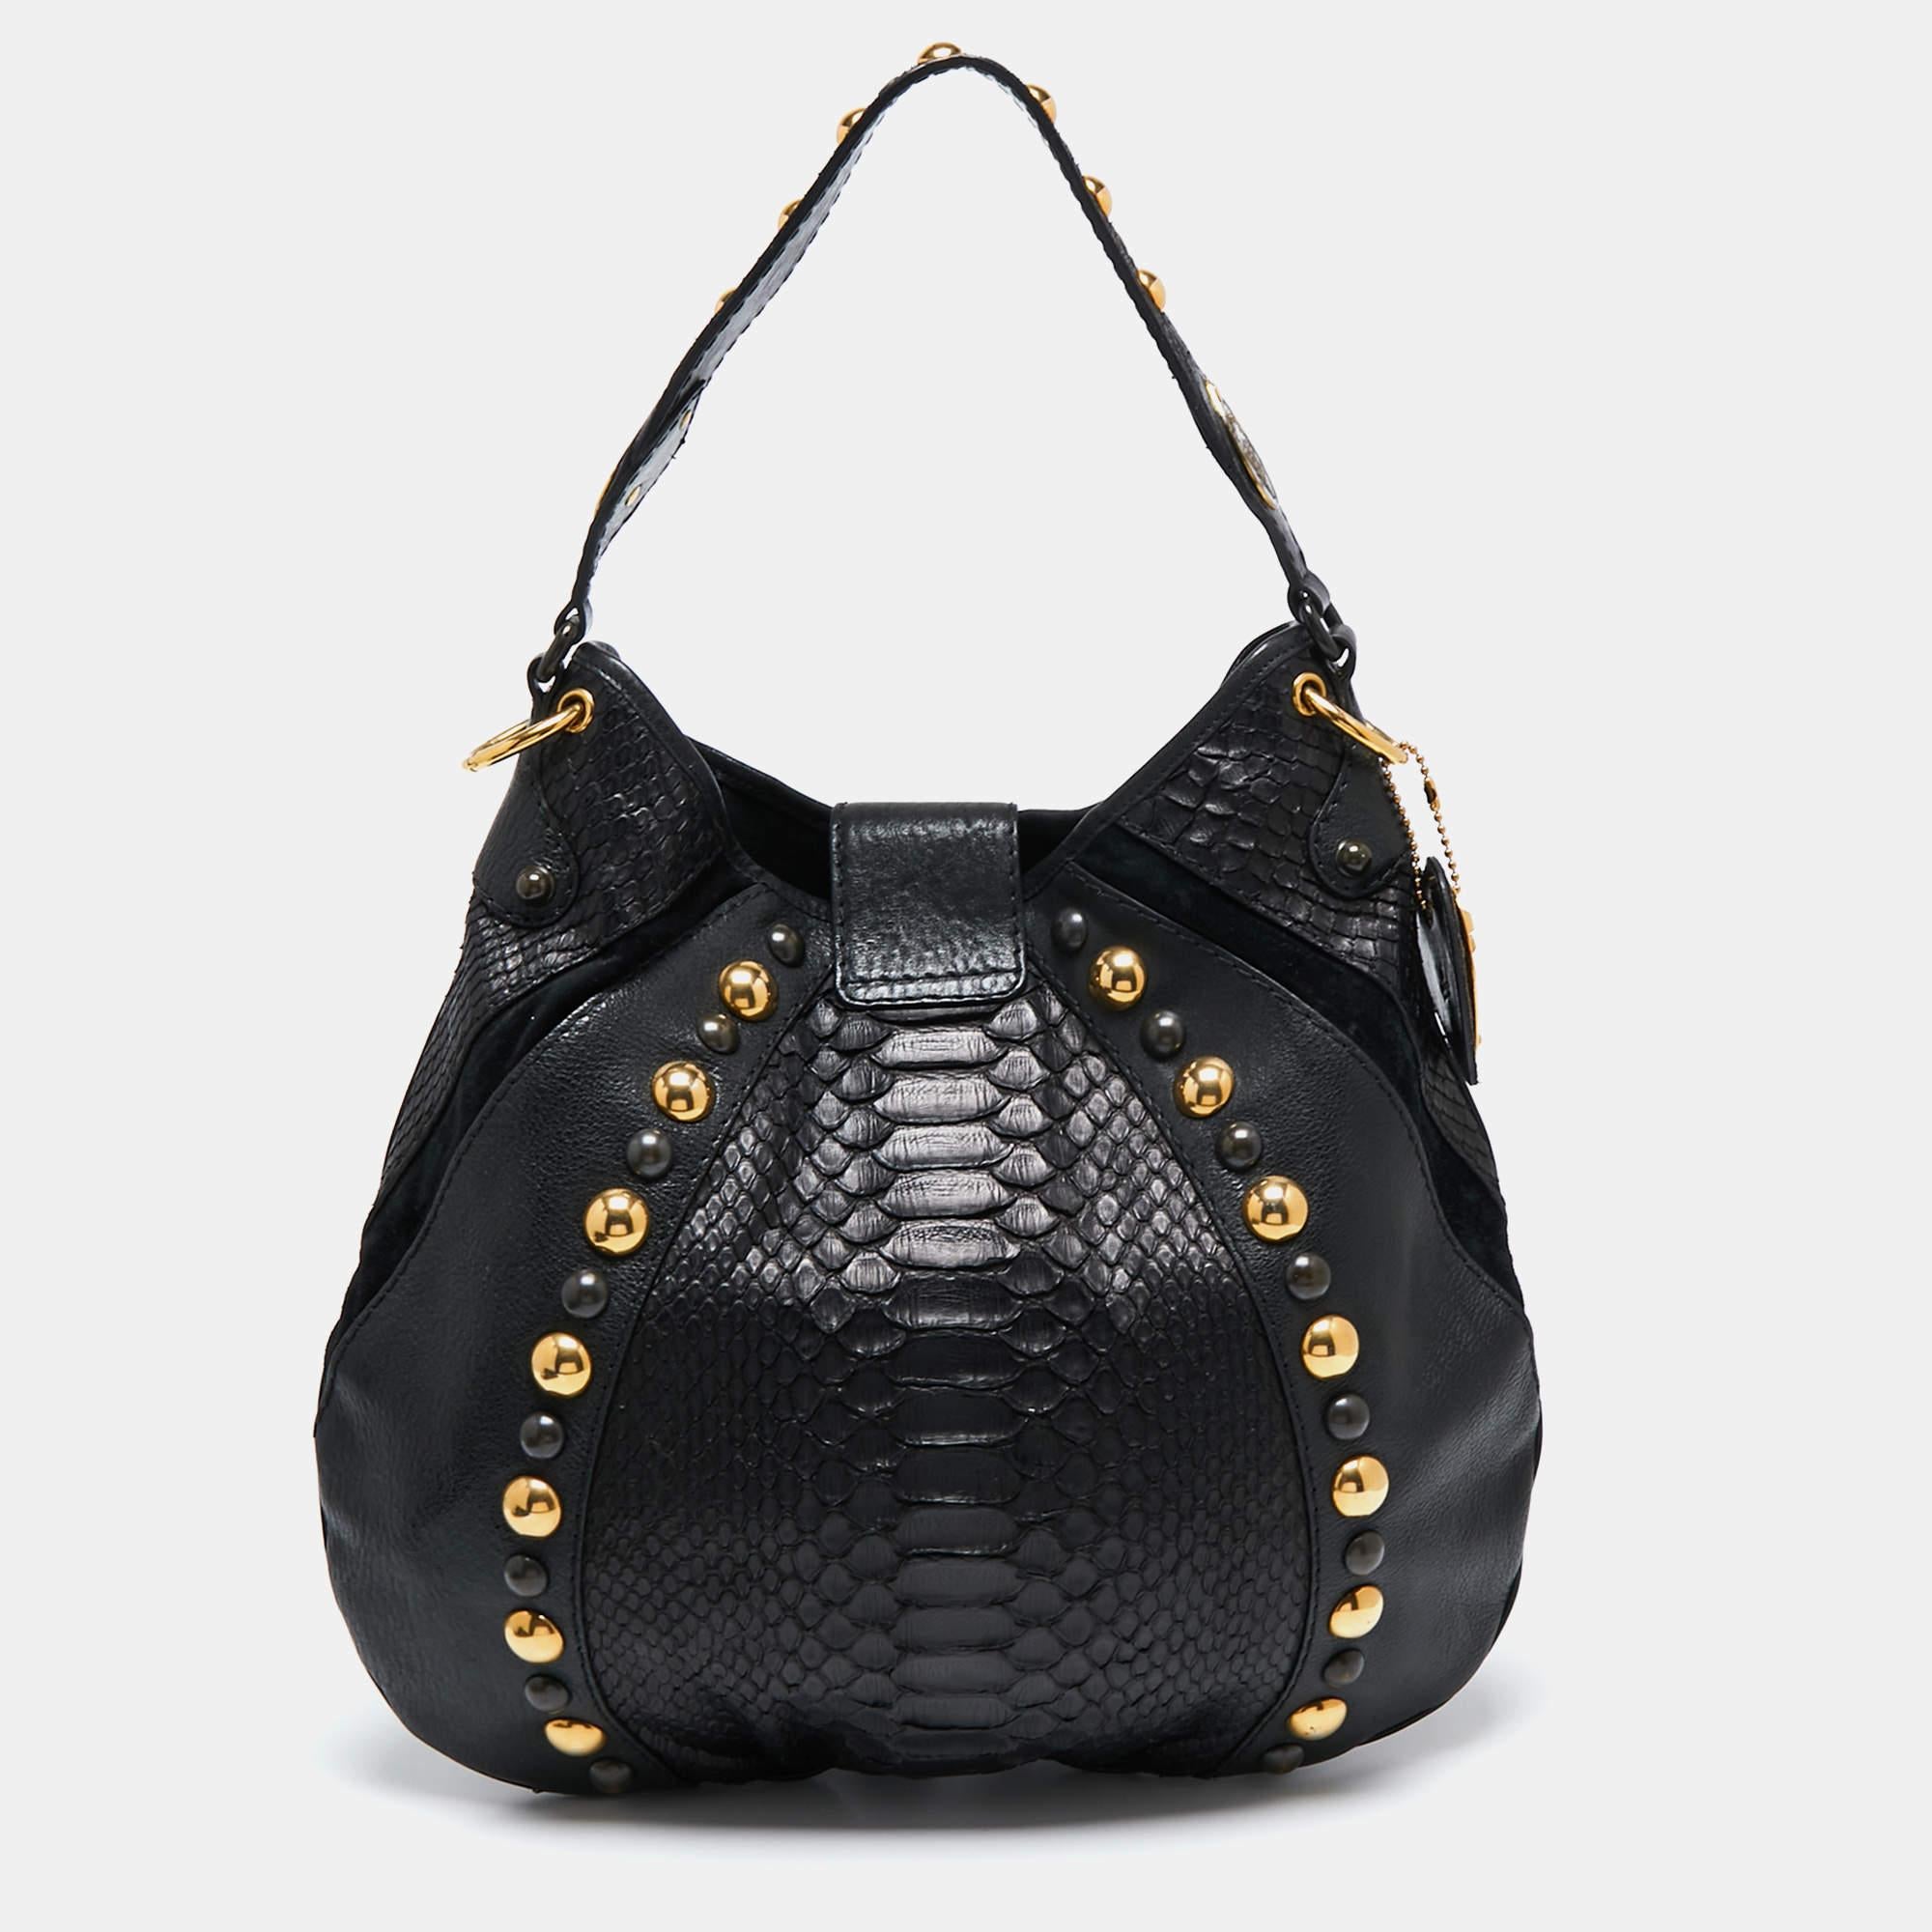 The Gucci Babouska hobo is a modern everyday bag with a chic Bohemian finish. This black bag is made of leather and python and is adorned with fringe detailing. It is finished with studs, a top handle, and a detachable shoulder strap. The spacious